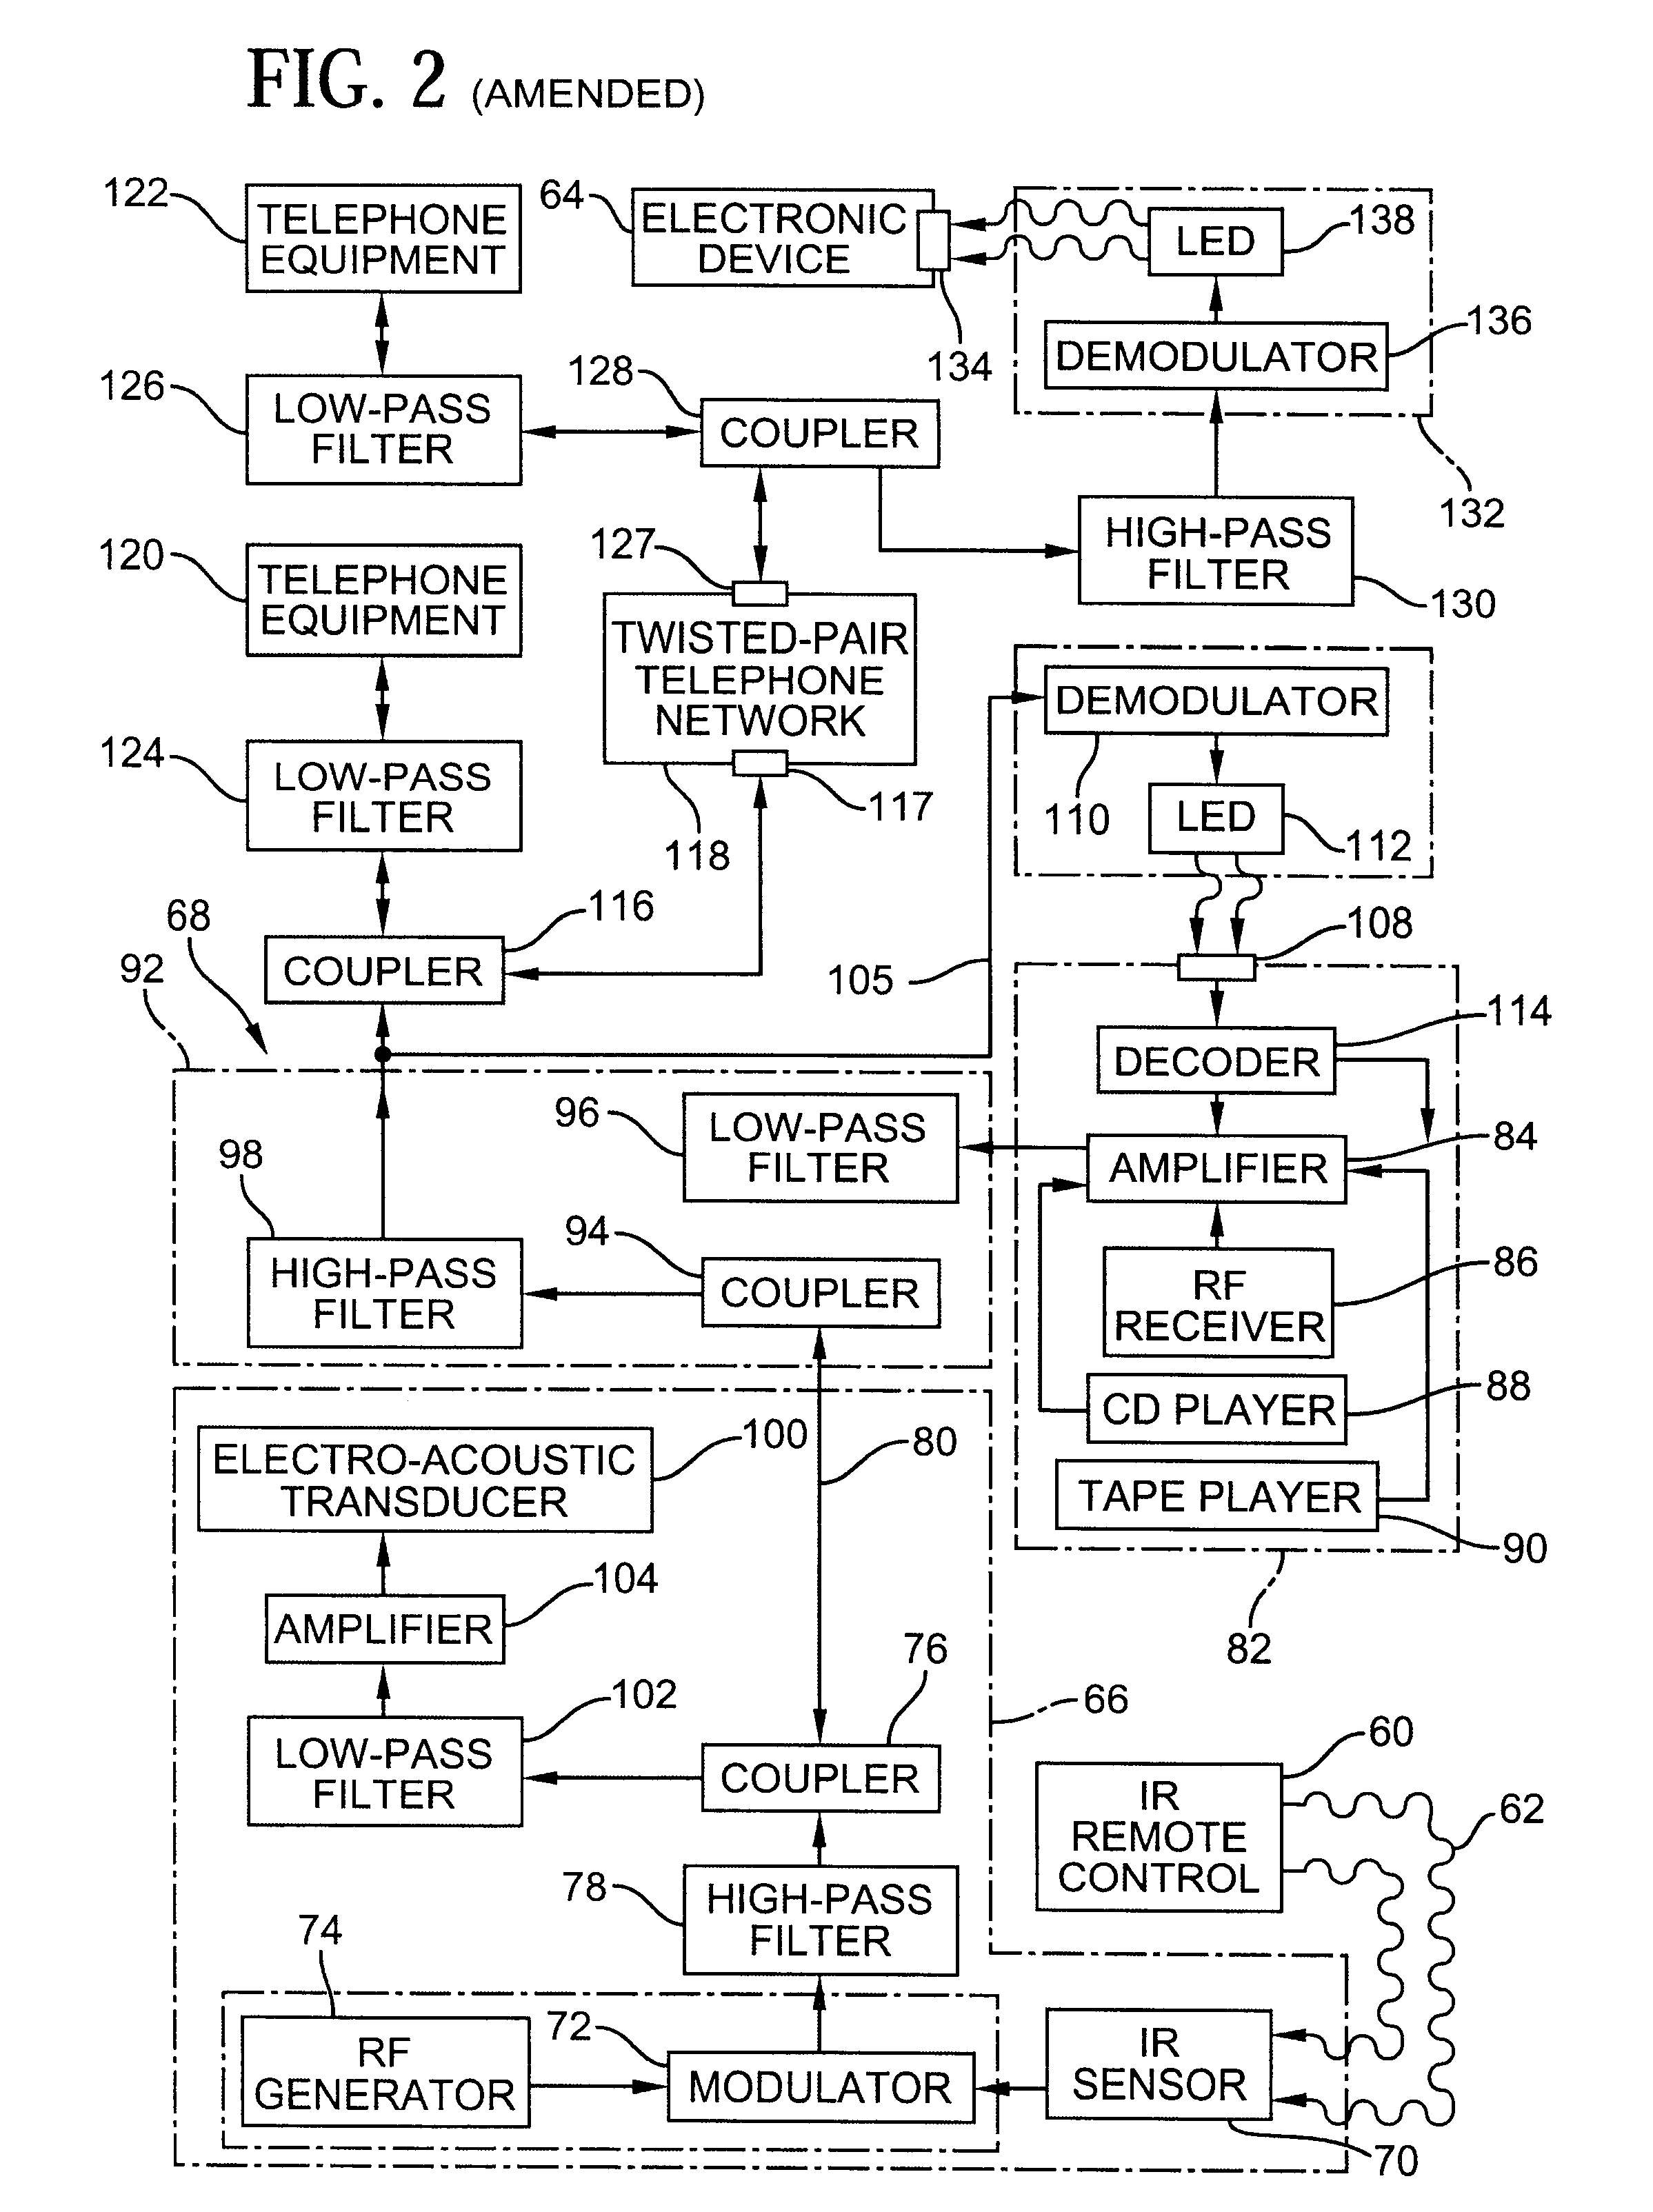 System for extending infrared remote control